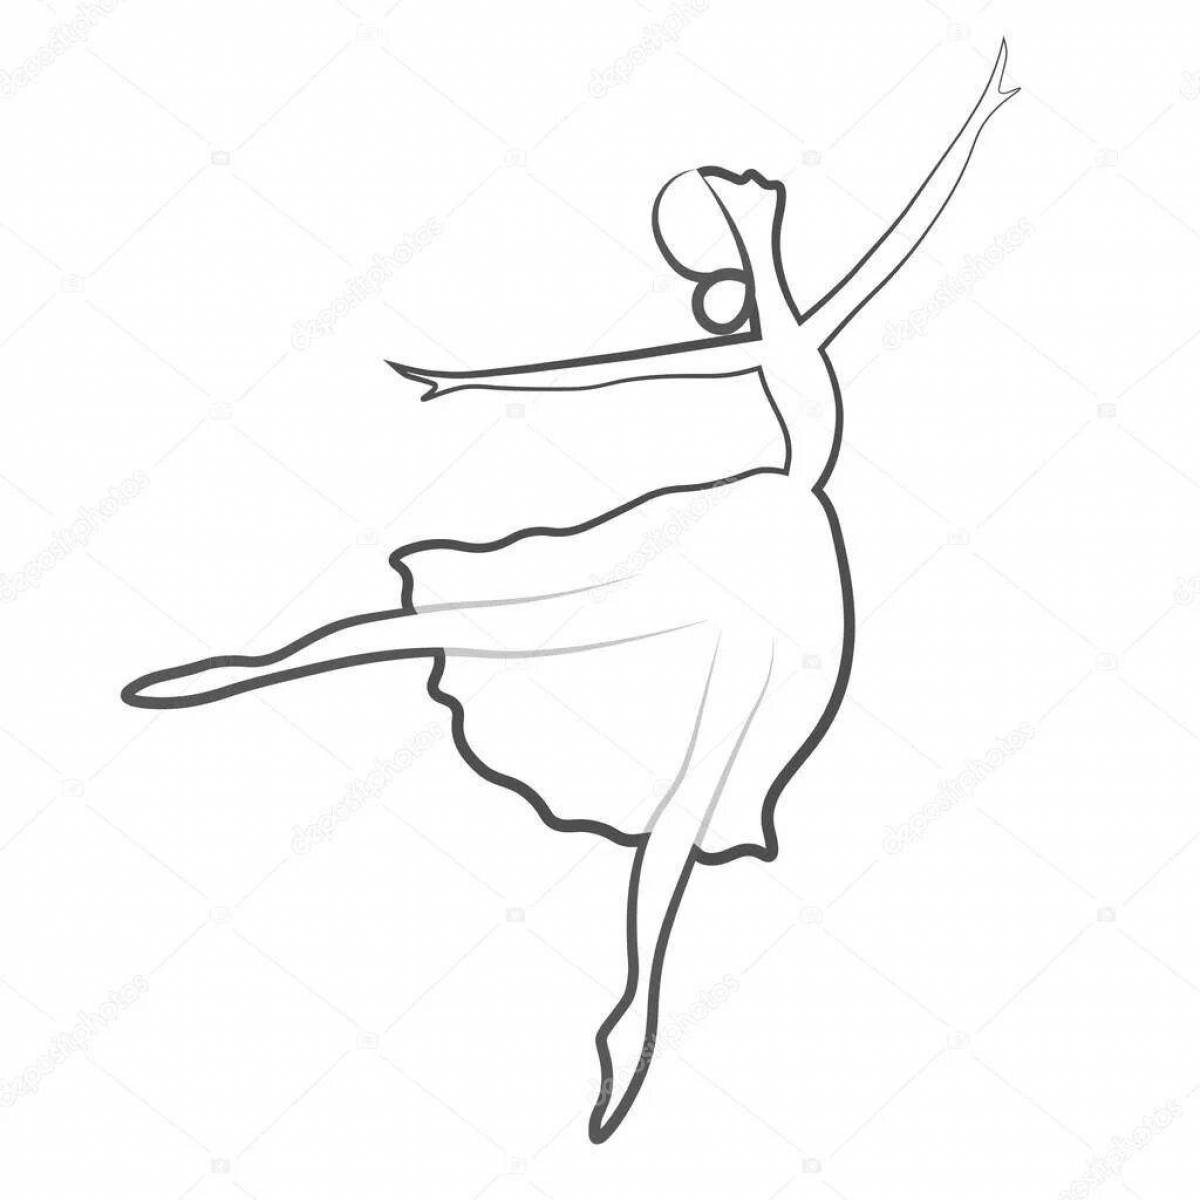 Coloring book silhouette of a beautiful ballerina